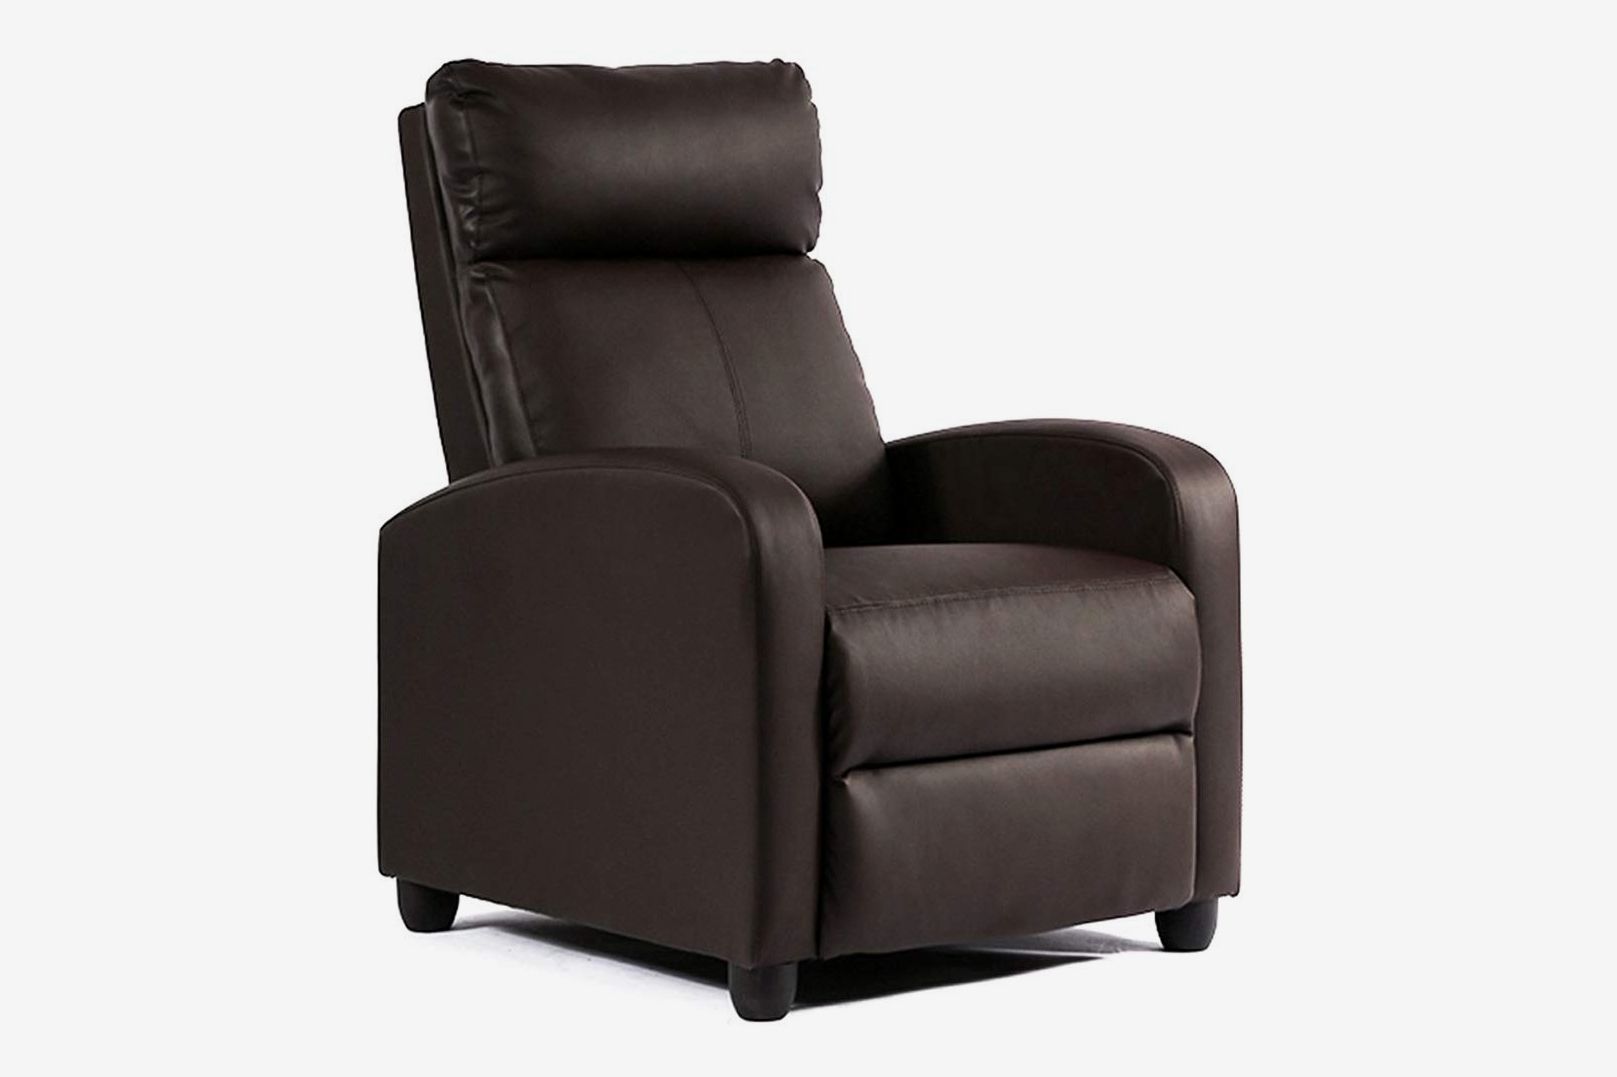 5 Best Leather Recliners 2019 The, Small Leather Easy Chairs